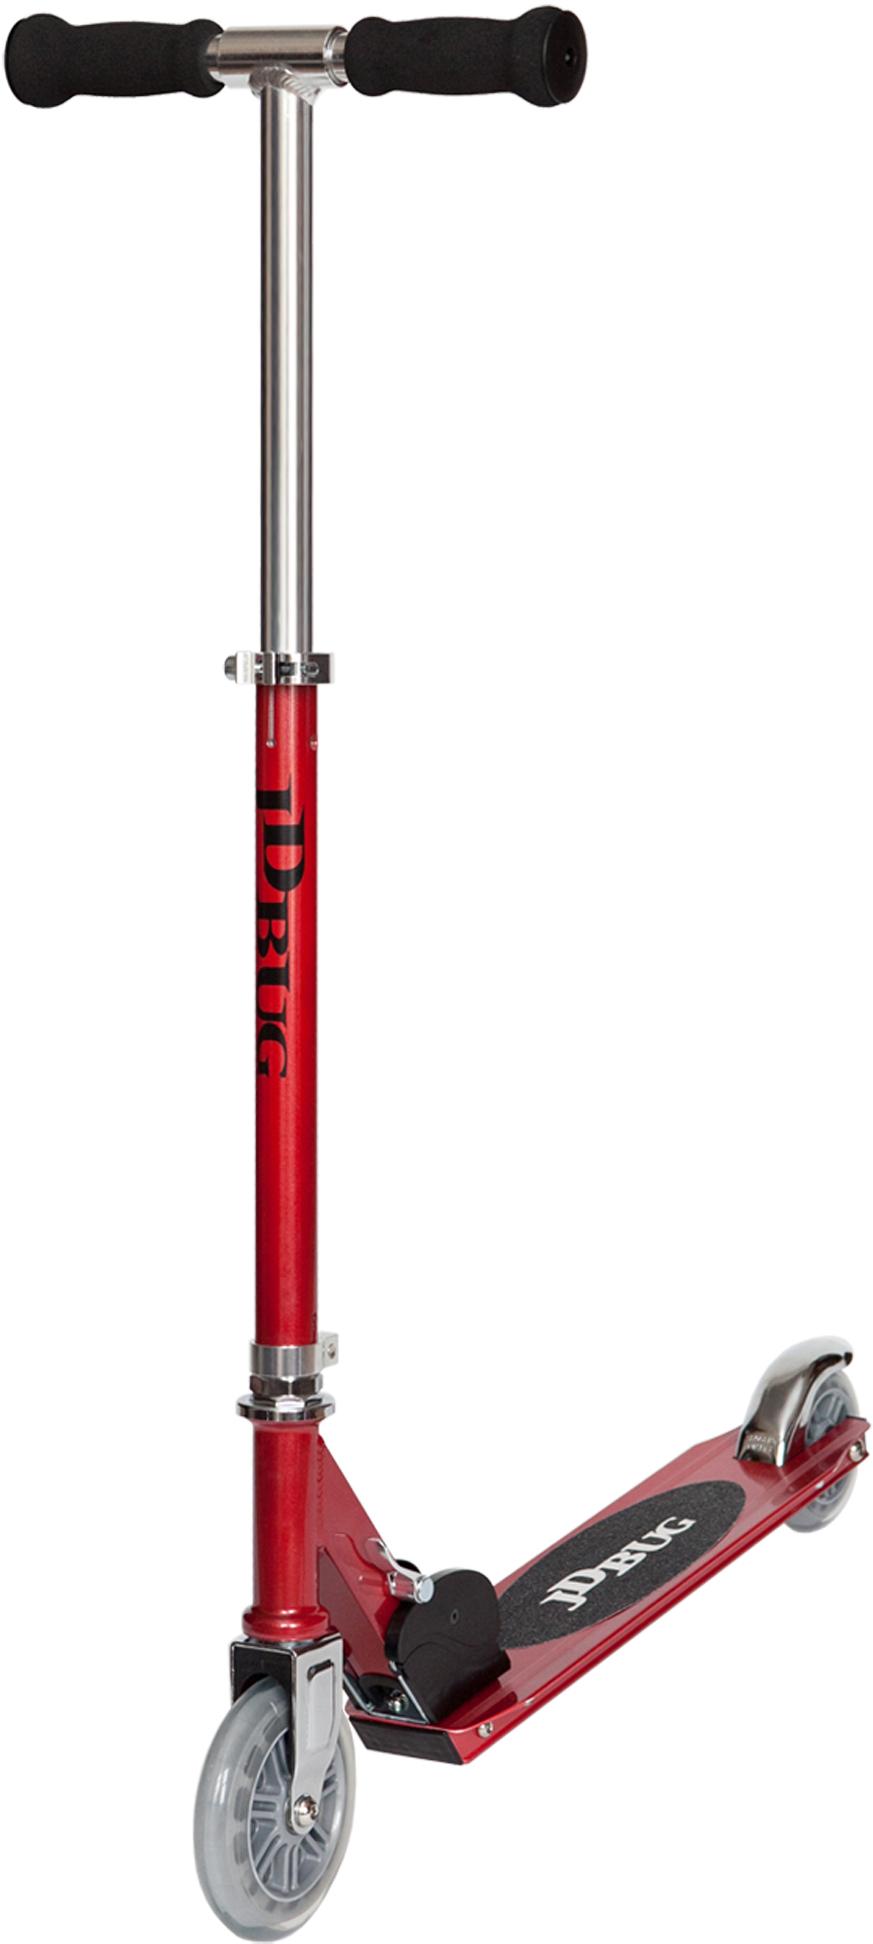 Jd Bug Jr Street Scooter - Red Pearl